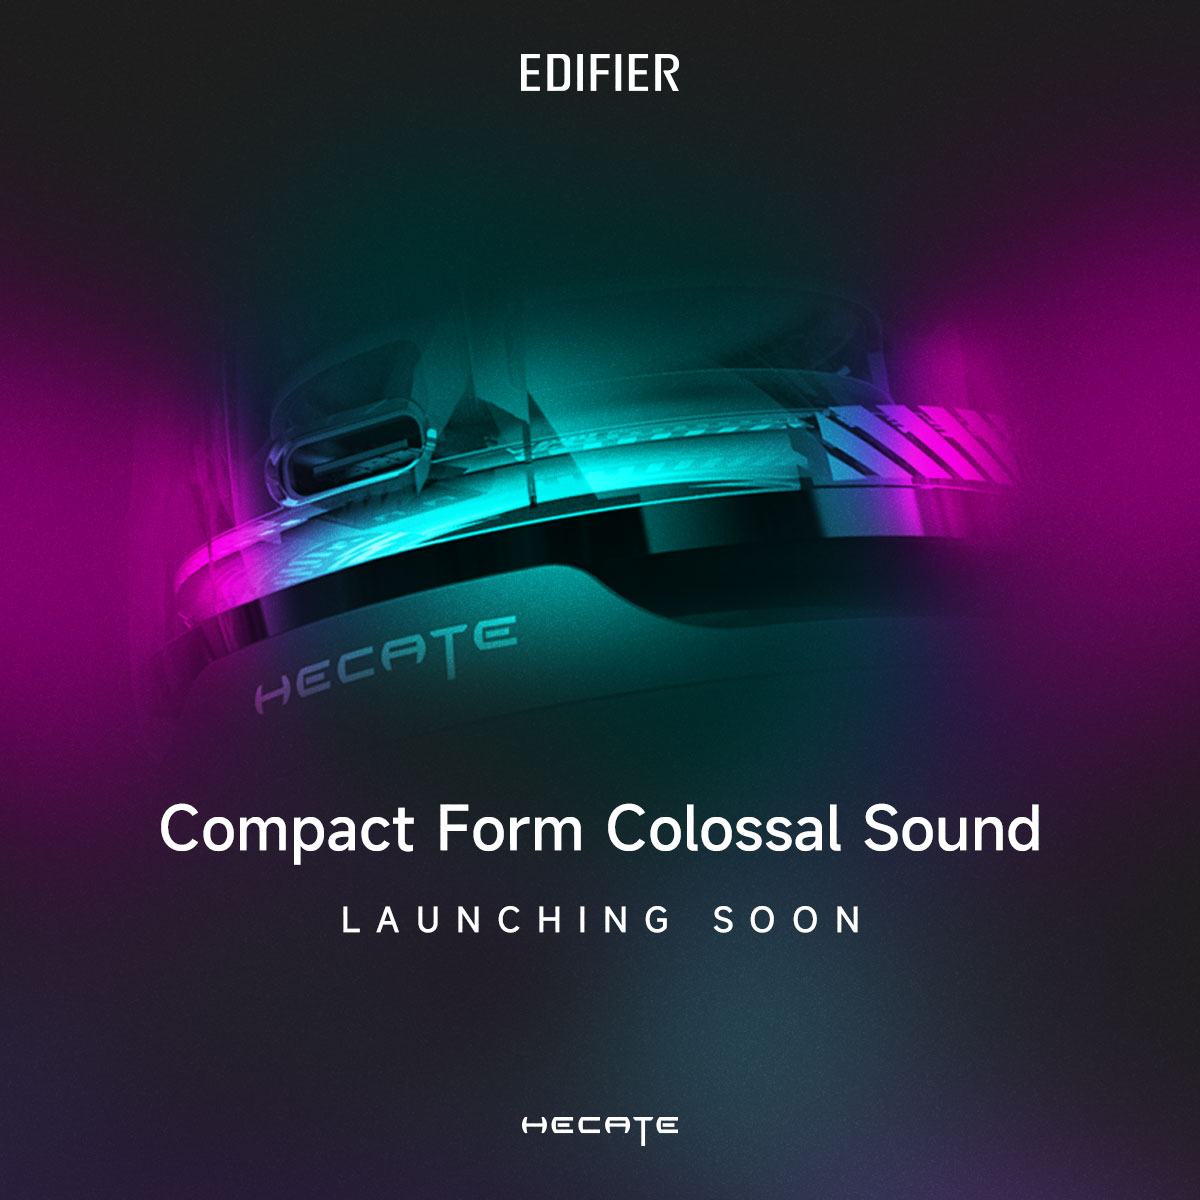 🎶 Get ready to experience the power of Compact Form Colossal Sound. Coming soon!

#EdifierMalaysia #Edifan #HECATE #hecatemalaysia #MusicRevolution #launchingsson #Newproduct #teaser #CompactFormColossalSound